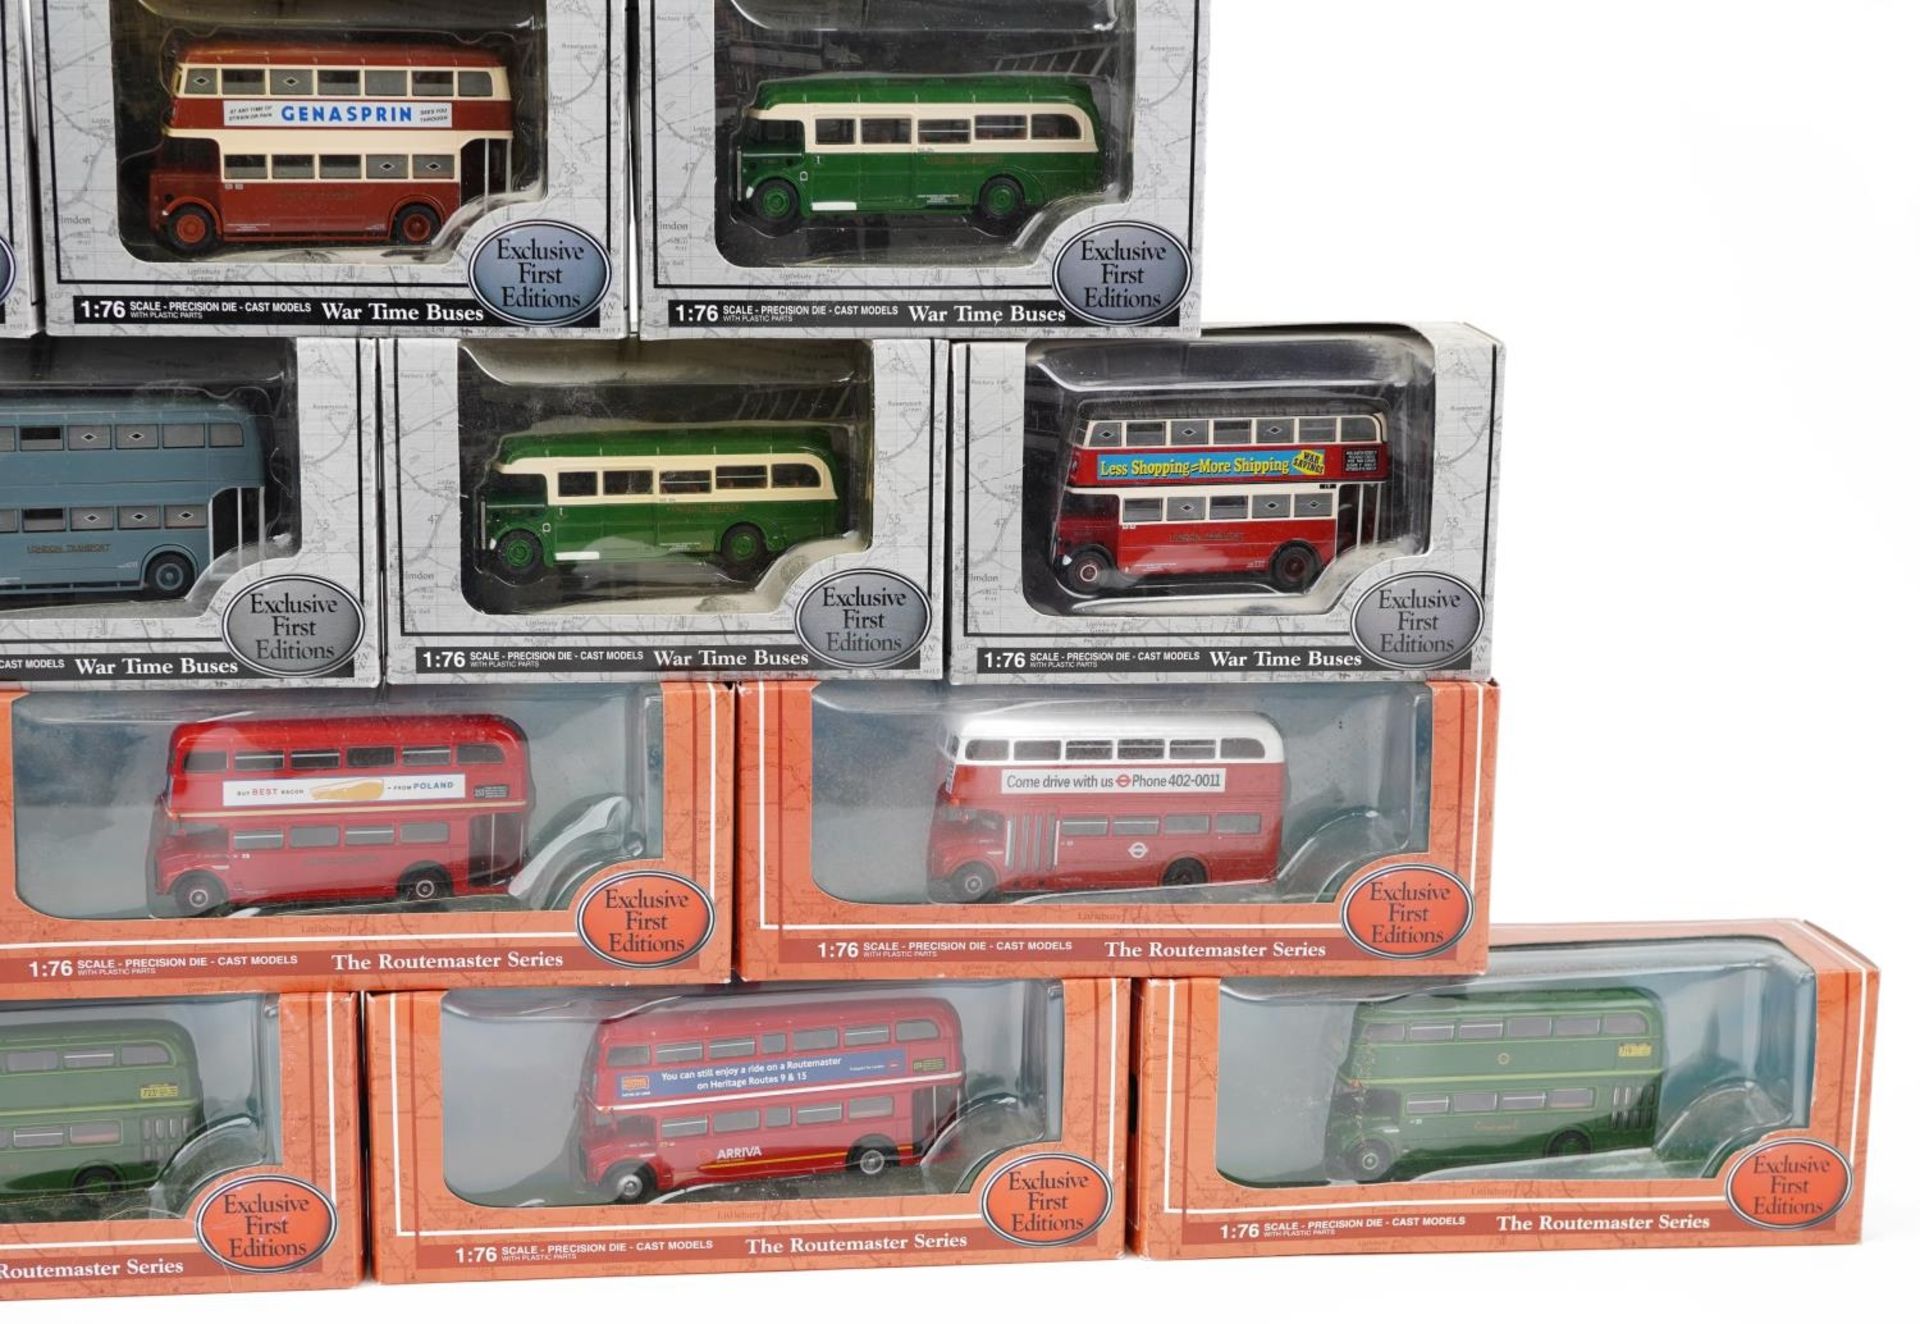 Sixteen Exclusive First Editions 1:76 scale diecast model buses with boxes from The Wartime Buses - Image 4 of 4